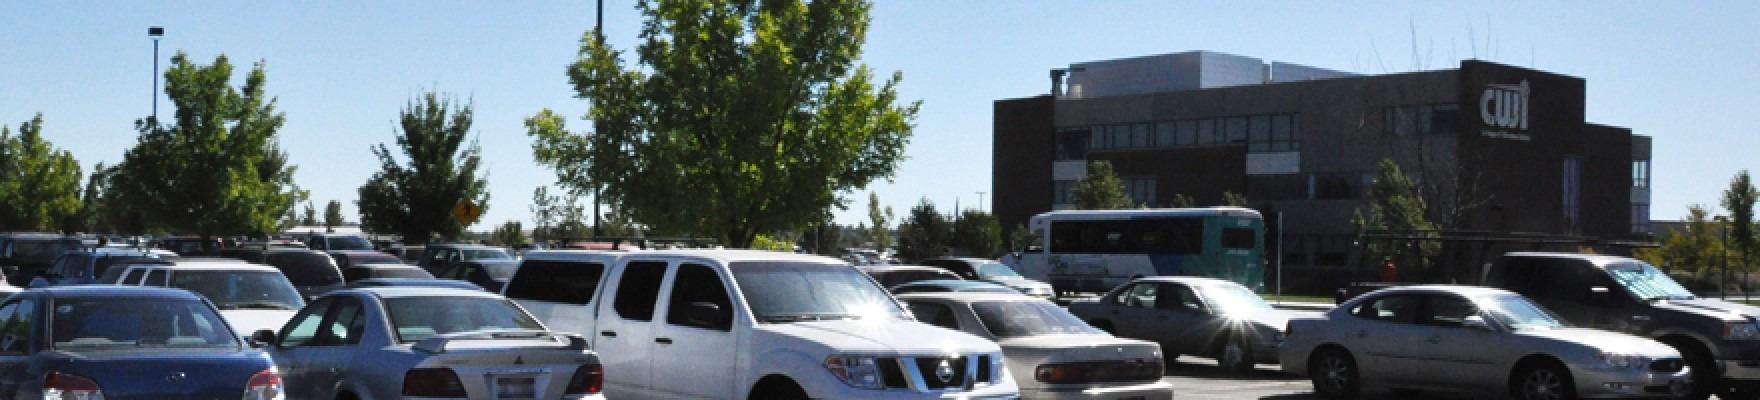 Vehicles in parking lot with CWI building in background.